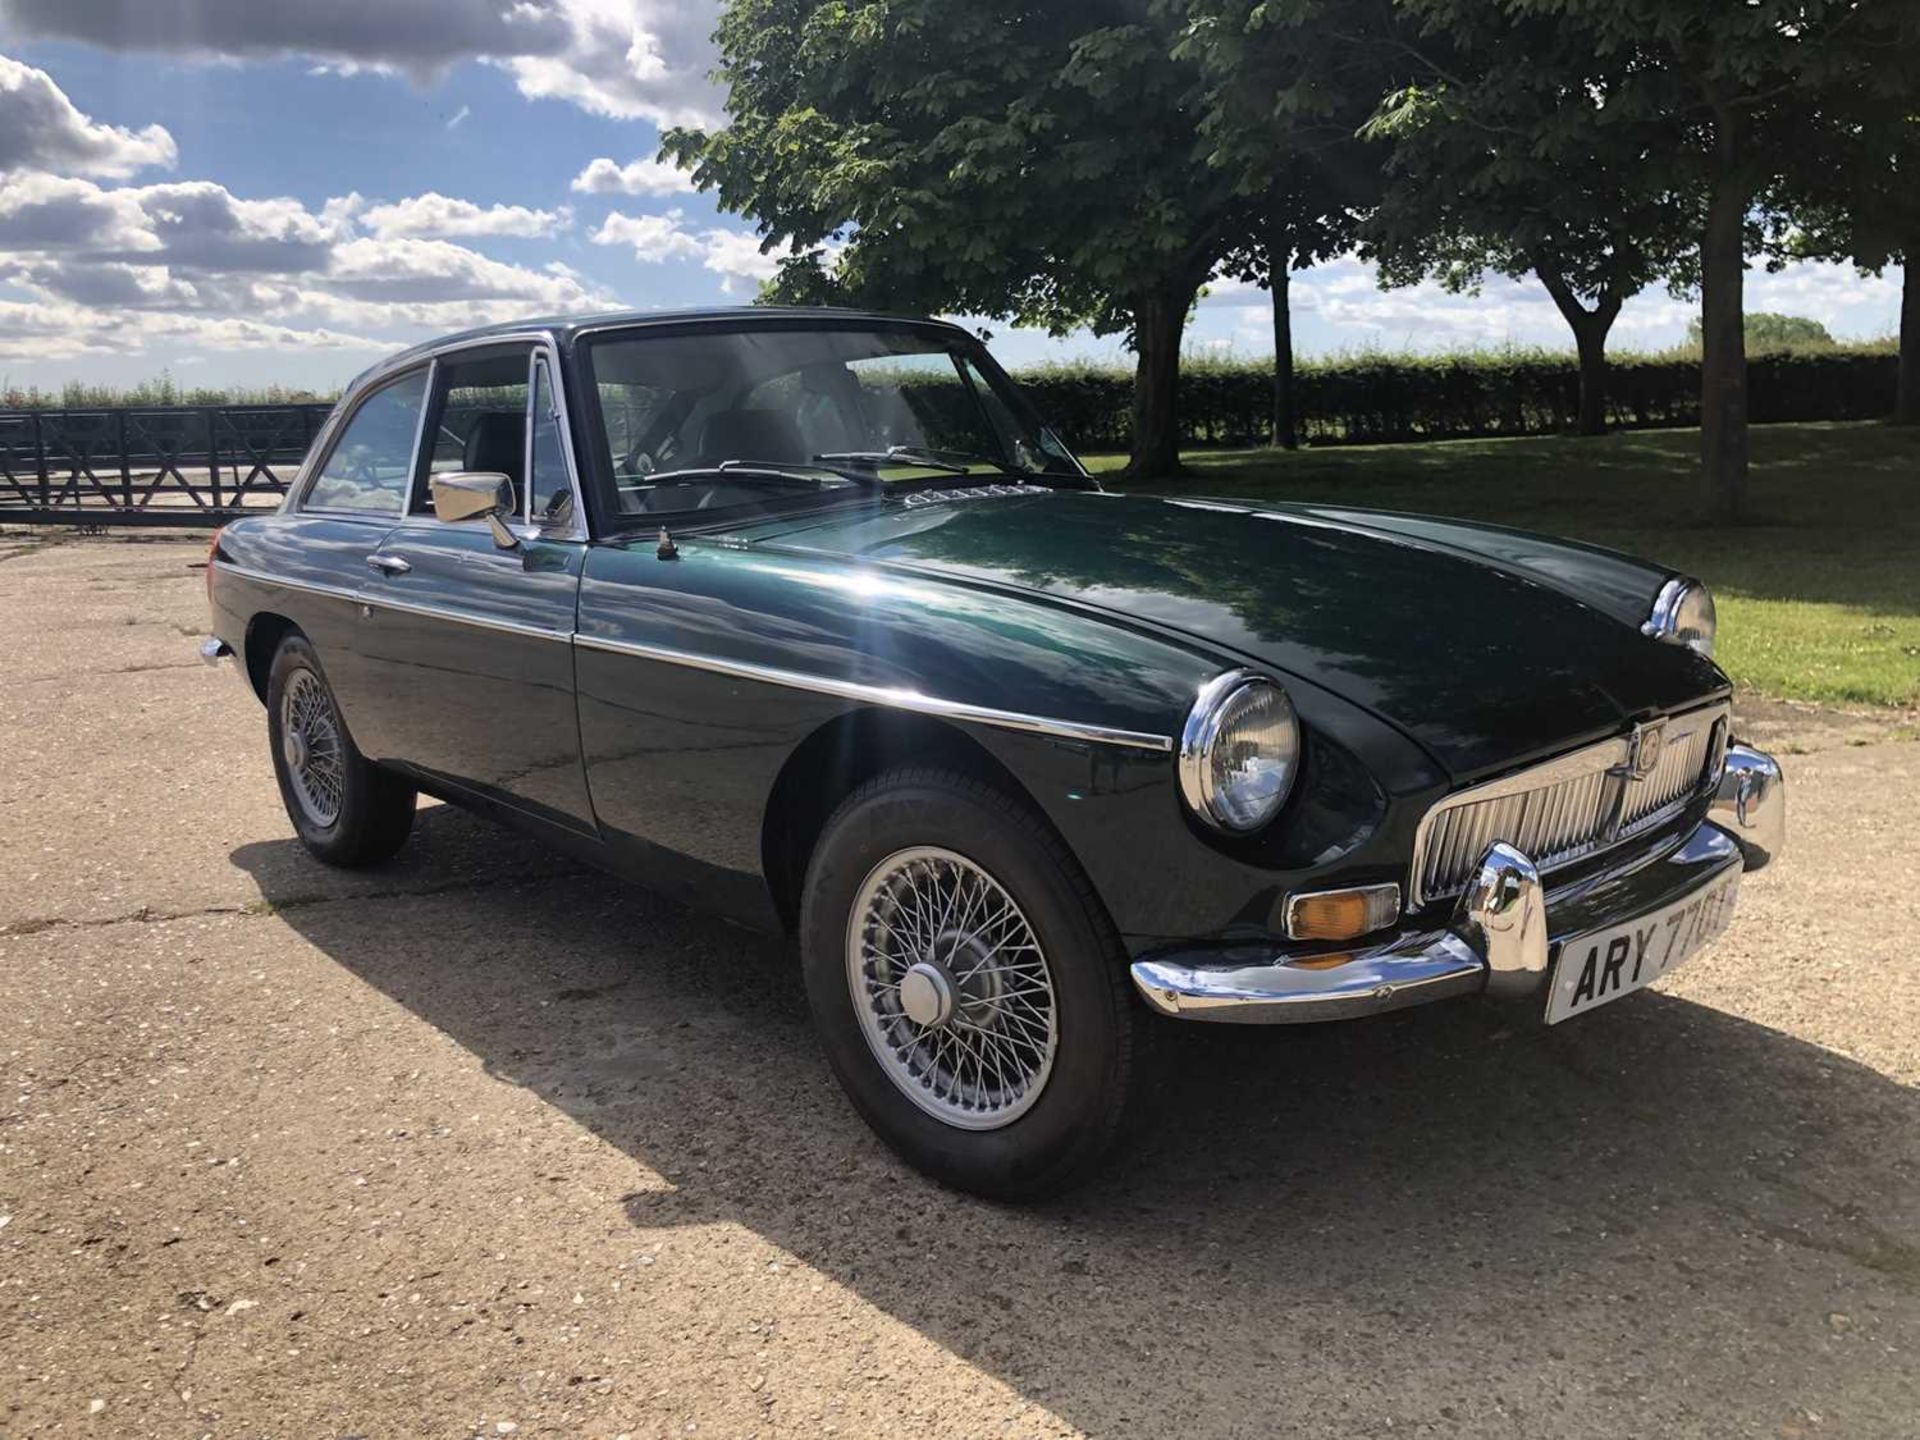 1978 MGB GT, 1.8 petrol, manual, chassis number GHD5-476466G, reg. no. ARY 770T